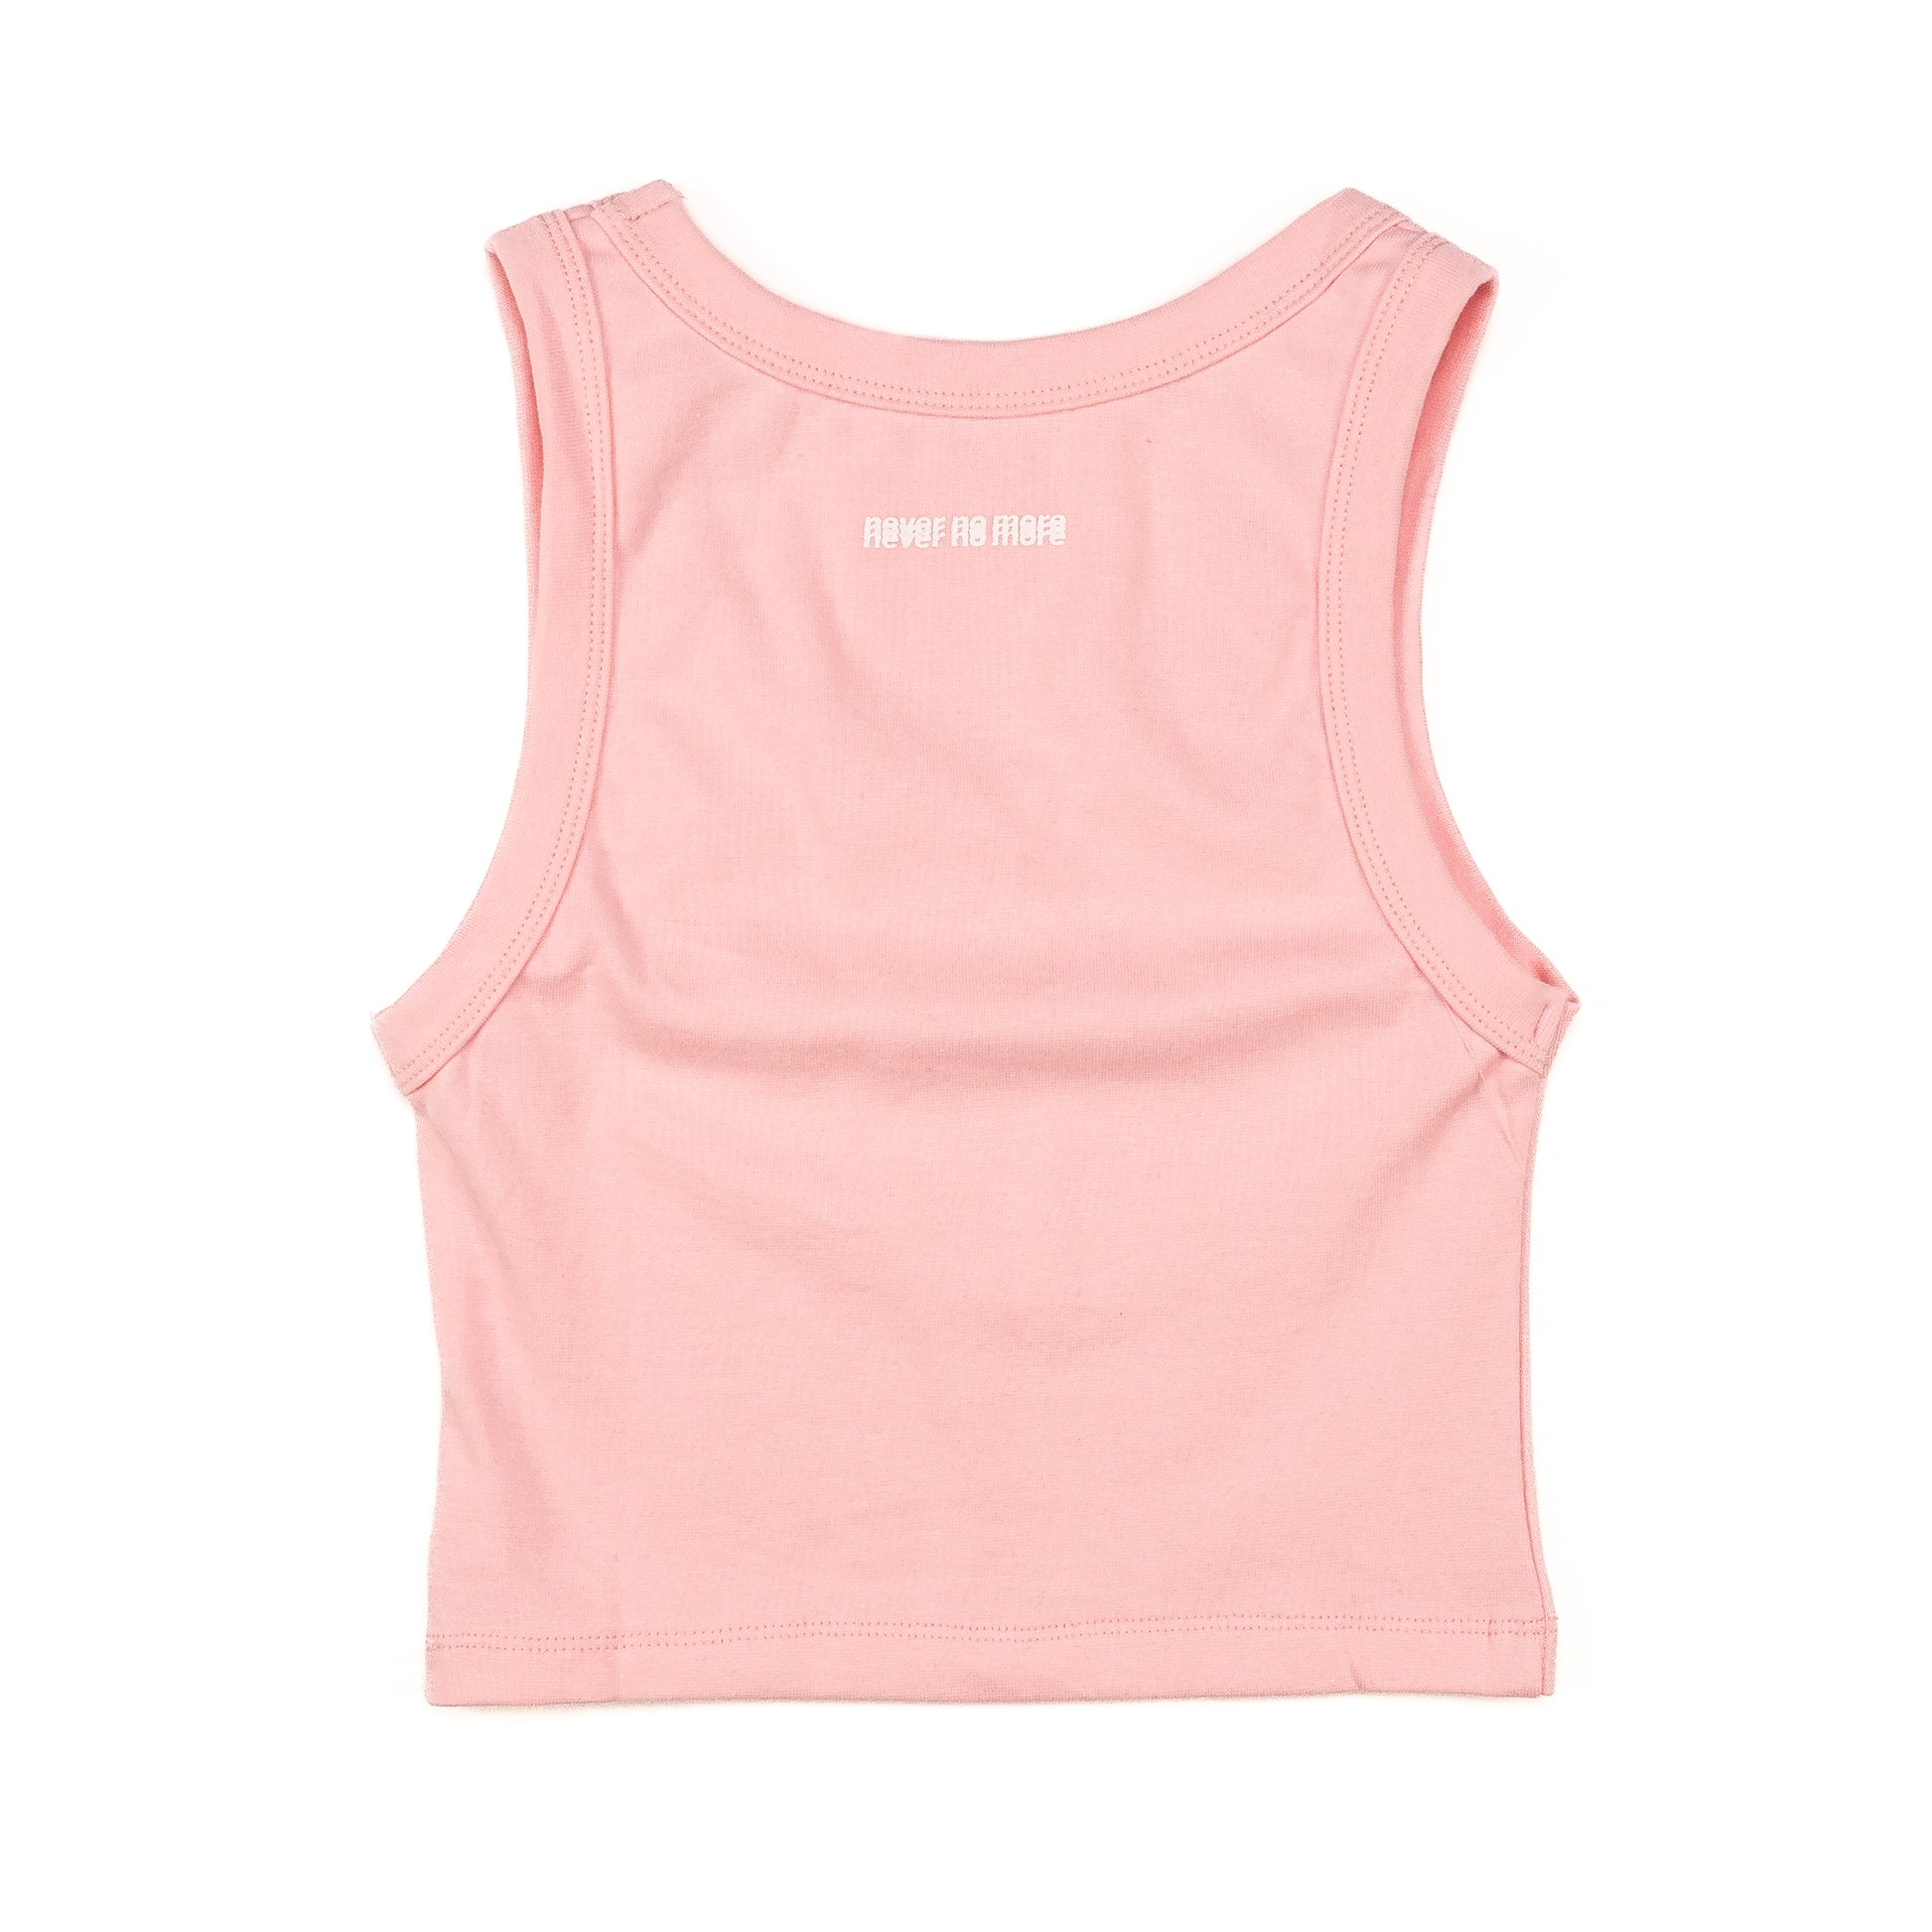 Womens Flying Duck Tank, Pink - Layr Official